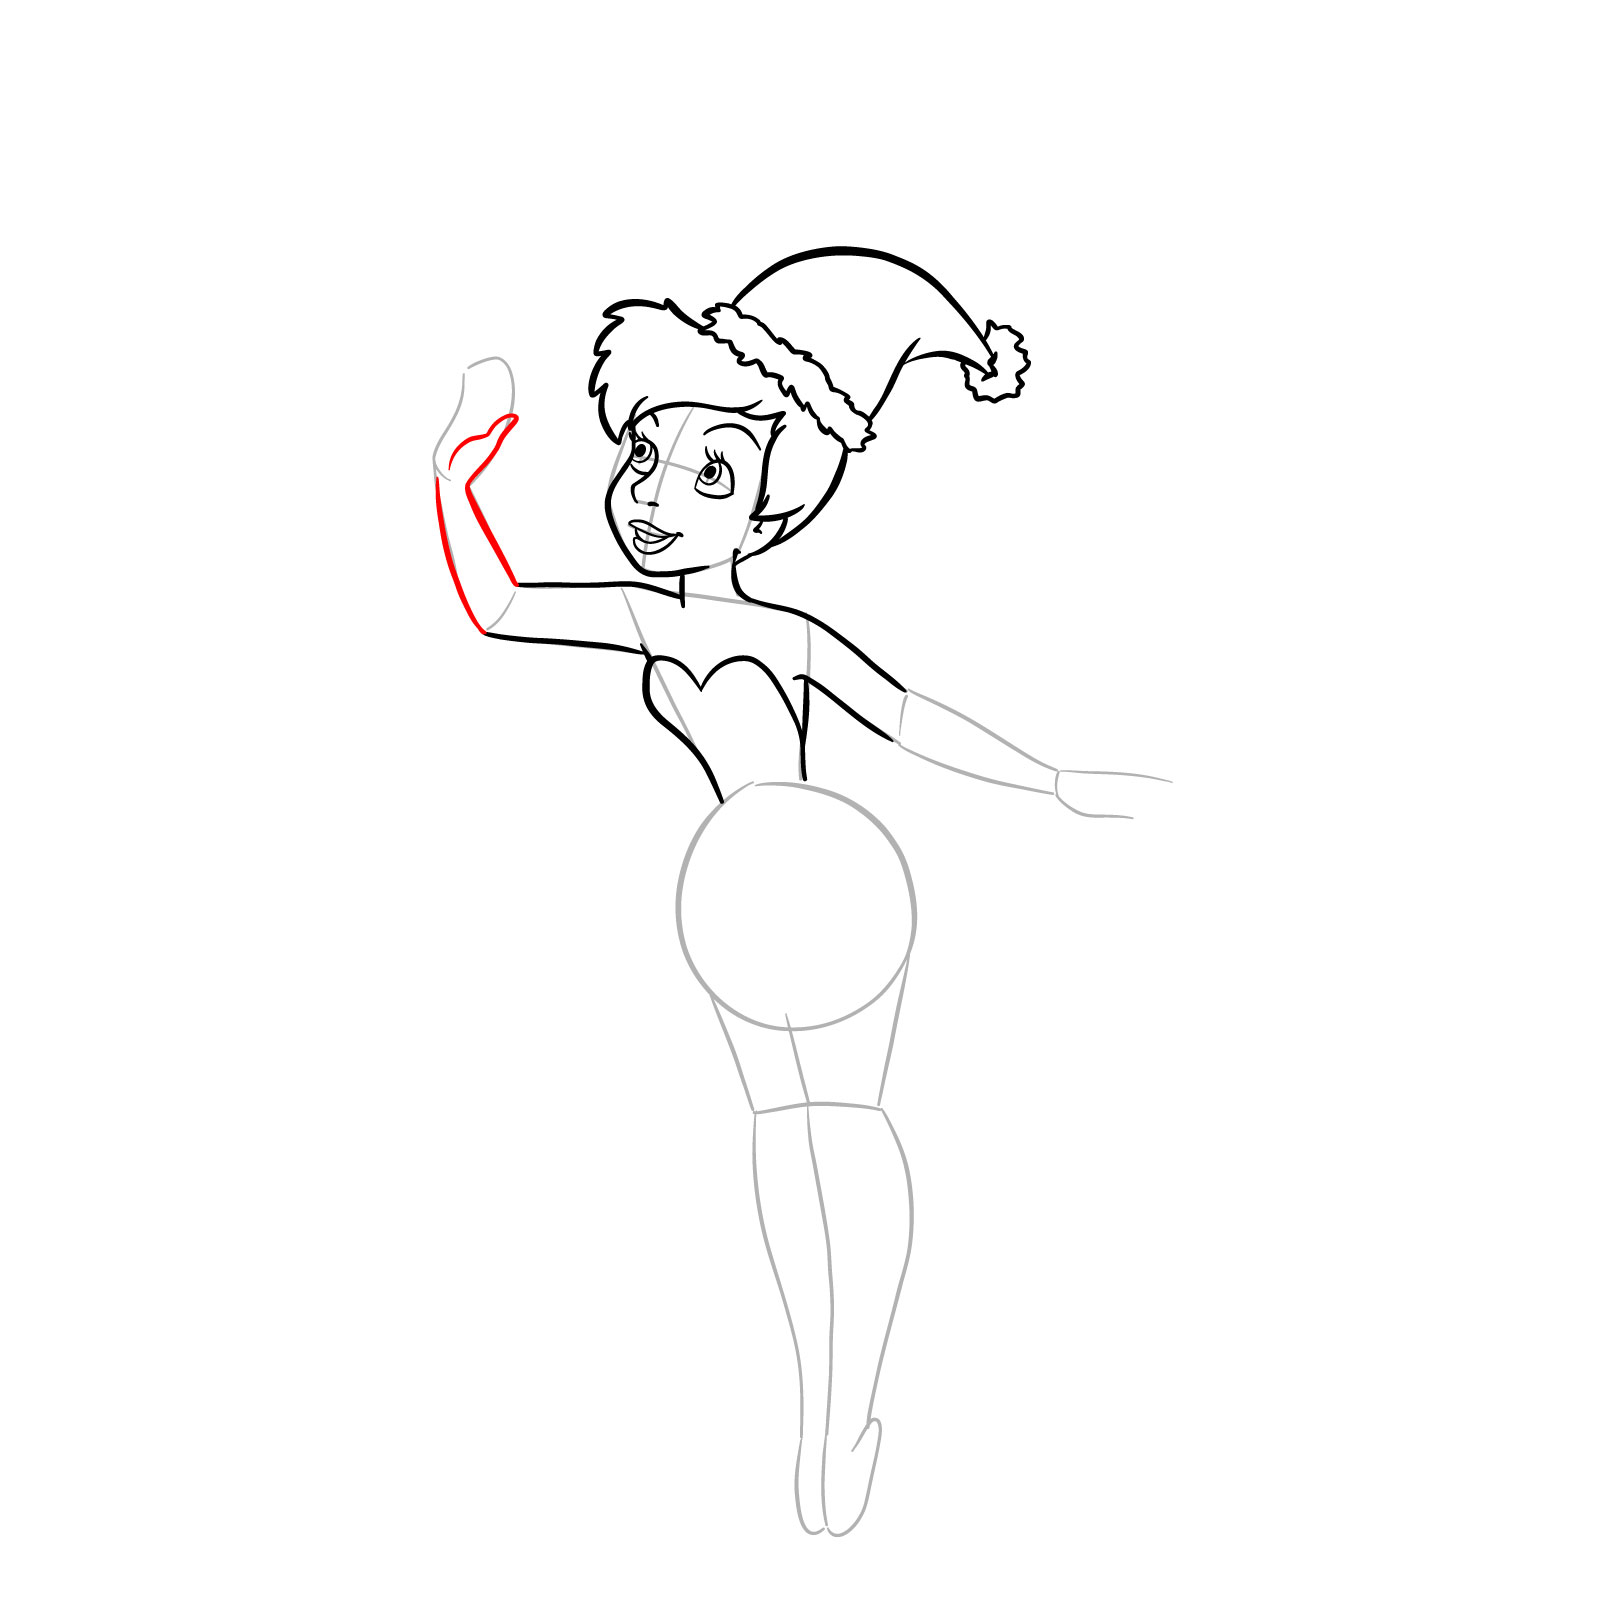 How to draw Tinker Bell in a Christmas costume - step 16